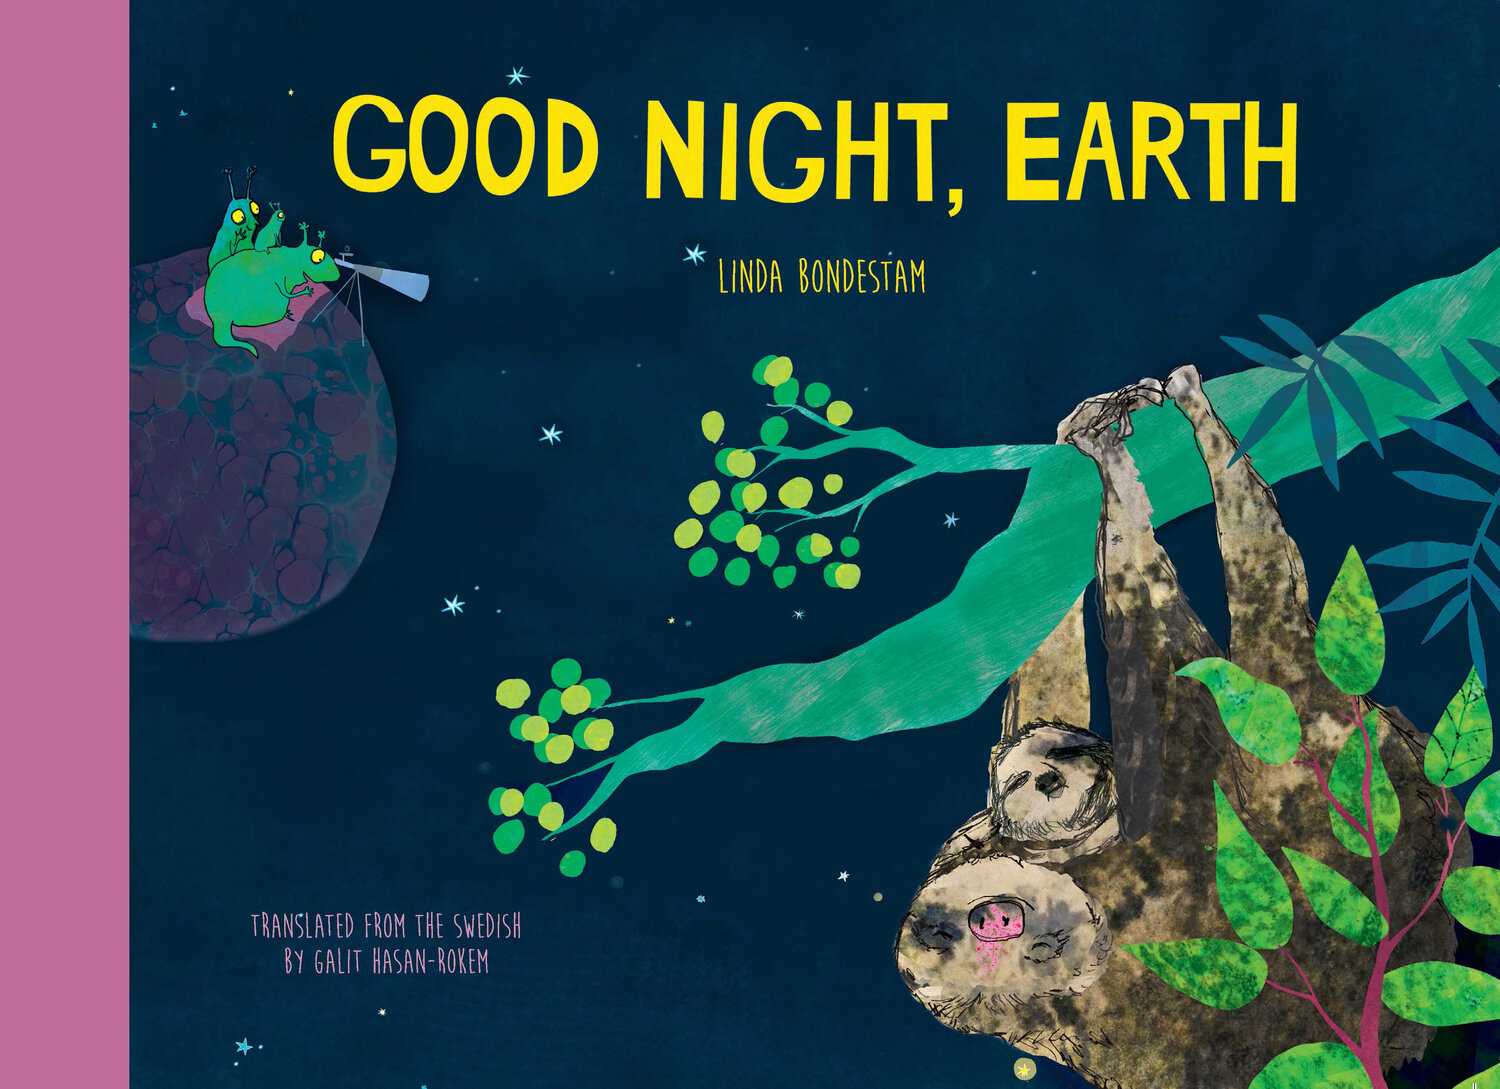 Cover of the picture book "Good Night, Earth" by Linda Bondestam. Two small green extraterrestials with yellow eyes observe through a telescope on a distant planet a parent and baby sloth sleeping back on Earth while hanging upside down from a green branch. 